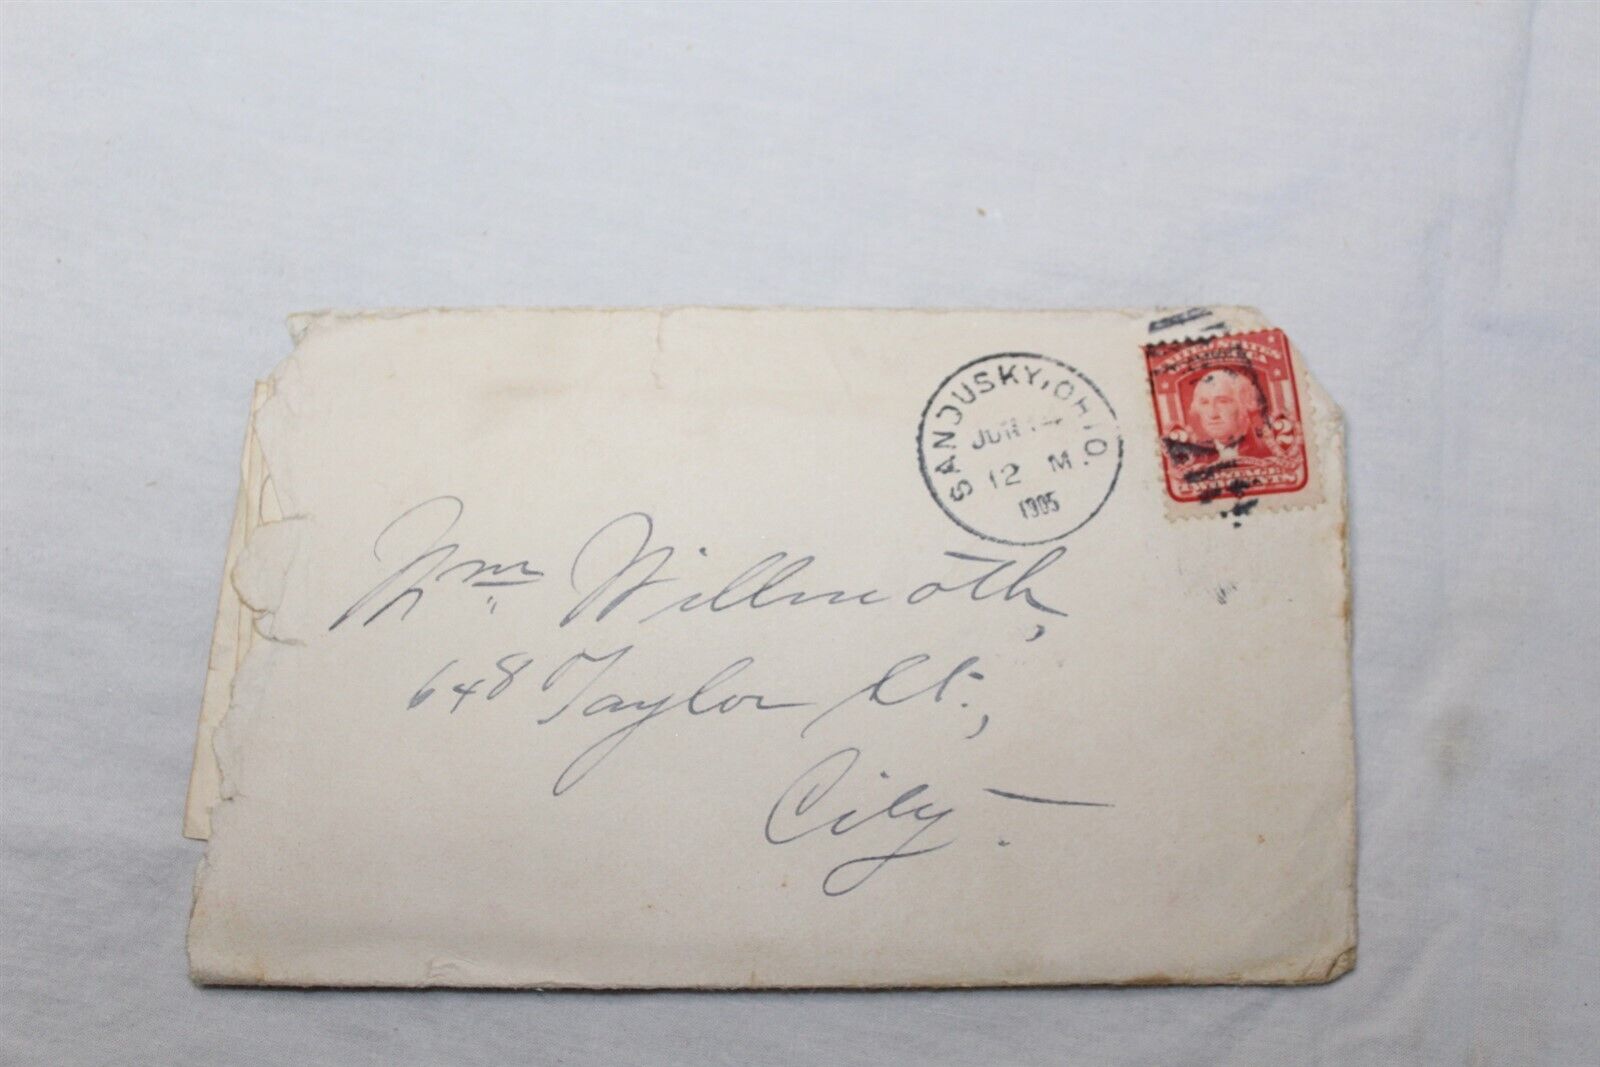  1905 Cancelled Stamp Set Of 2 Handwritten Story / Letters  Antique